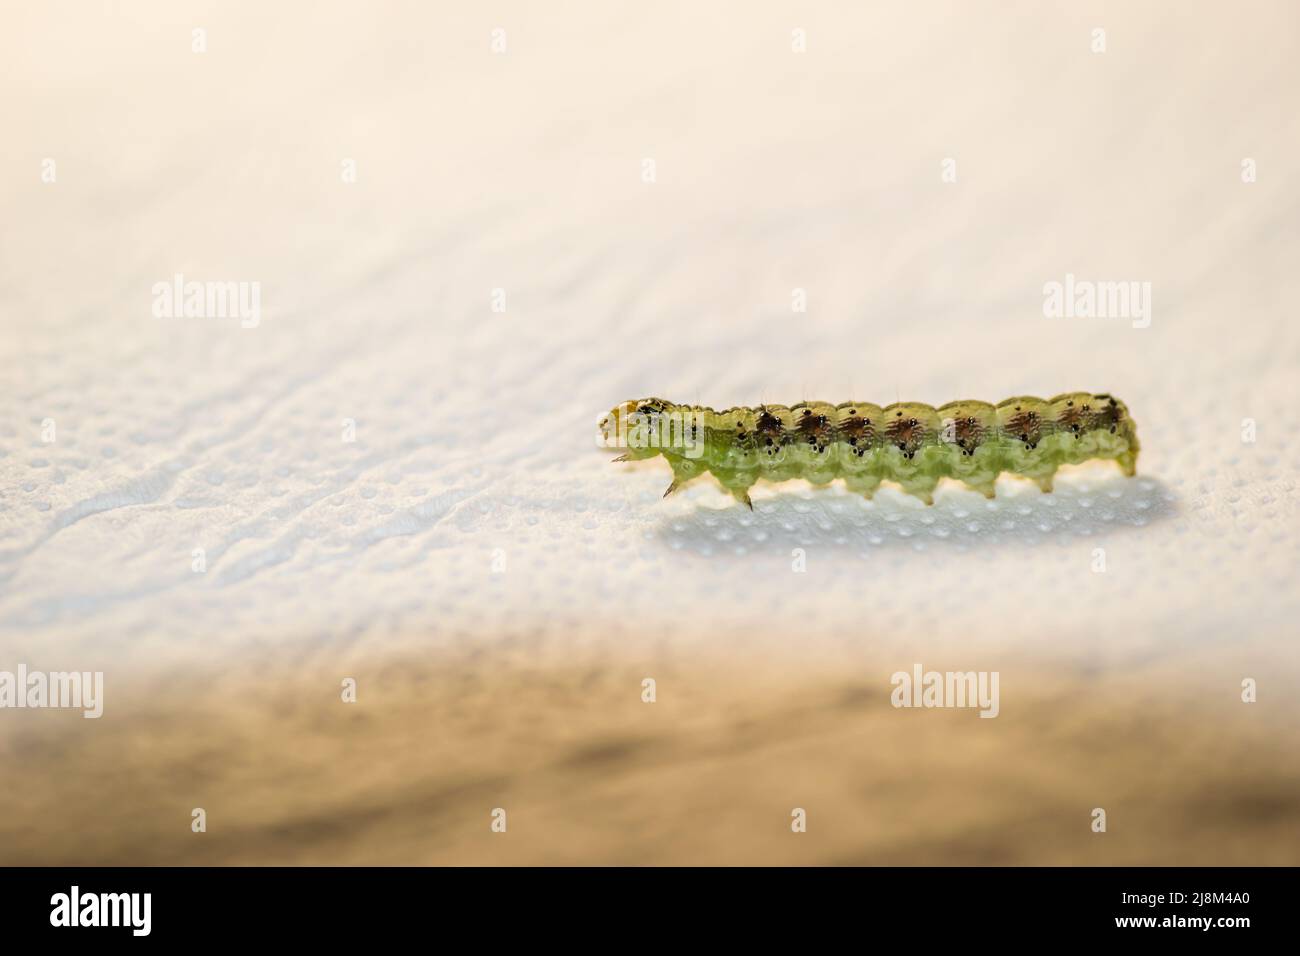 Green caterpillar on white paper, close-up. Stock Photo